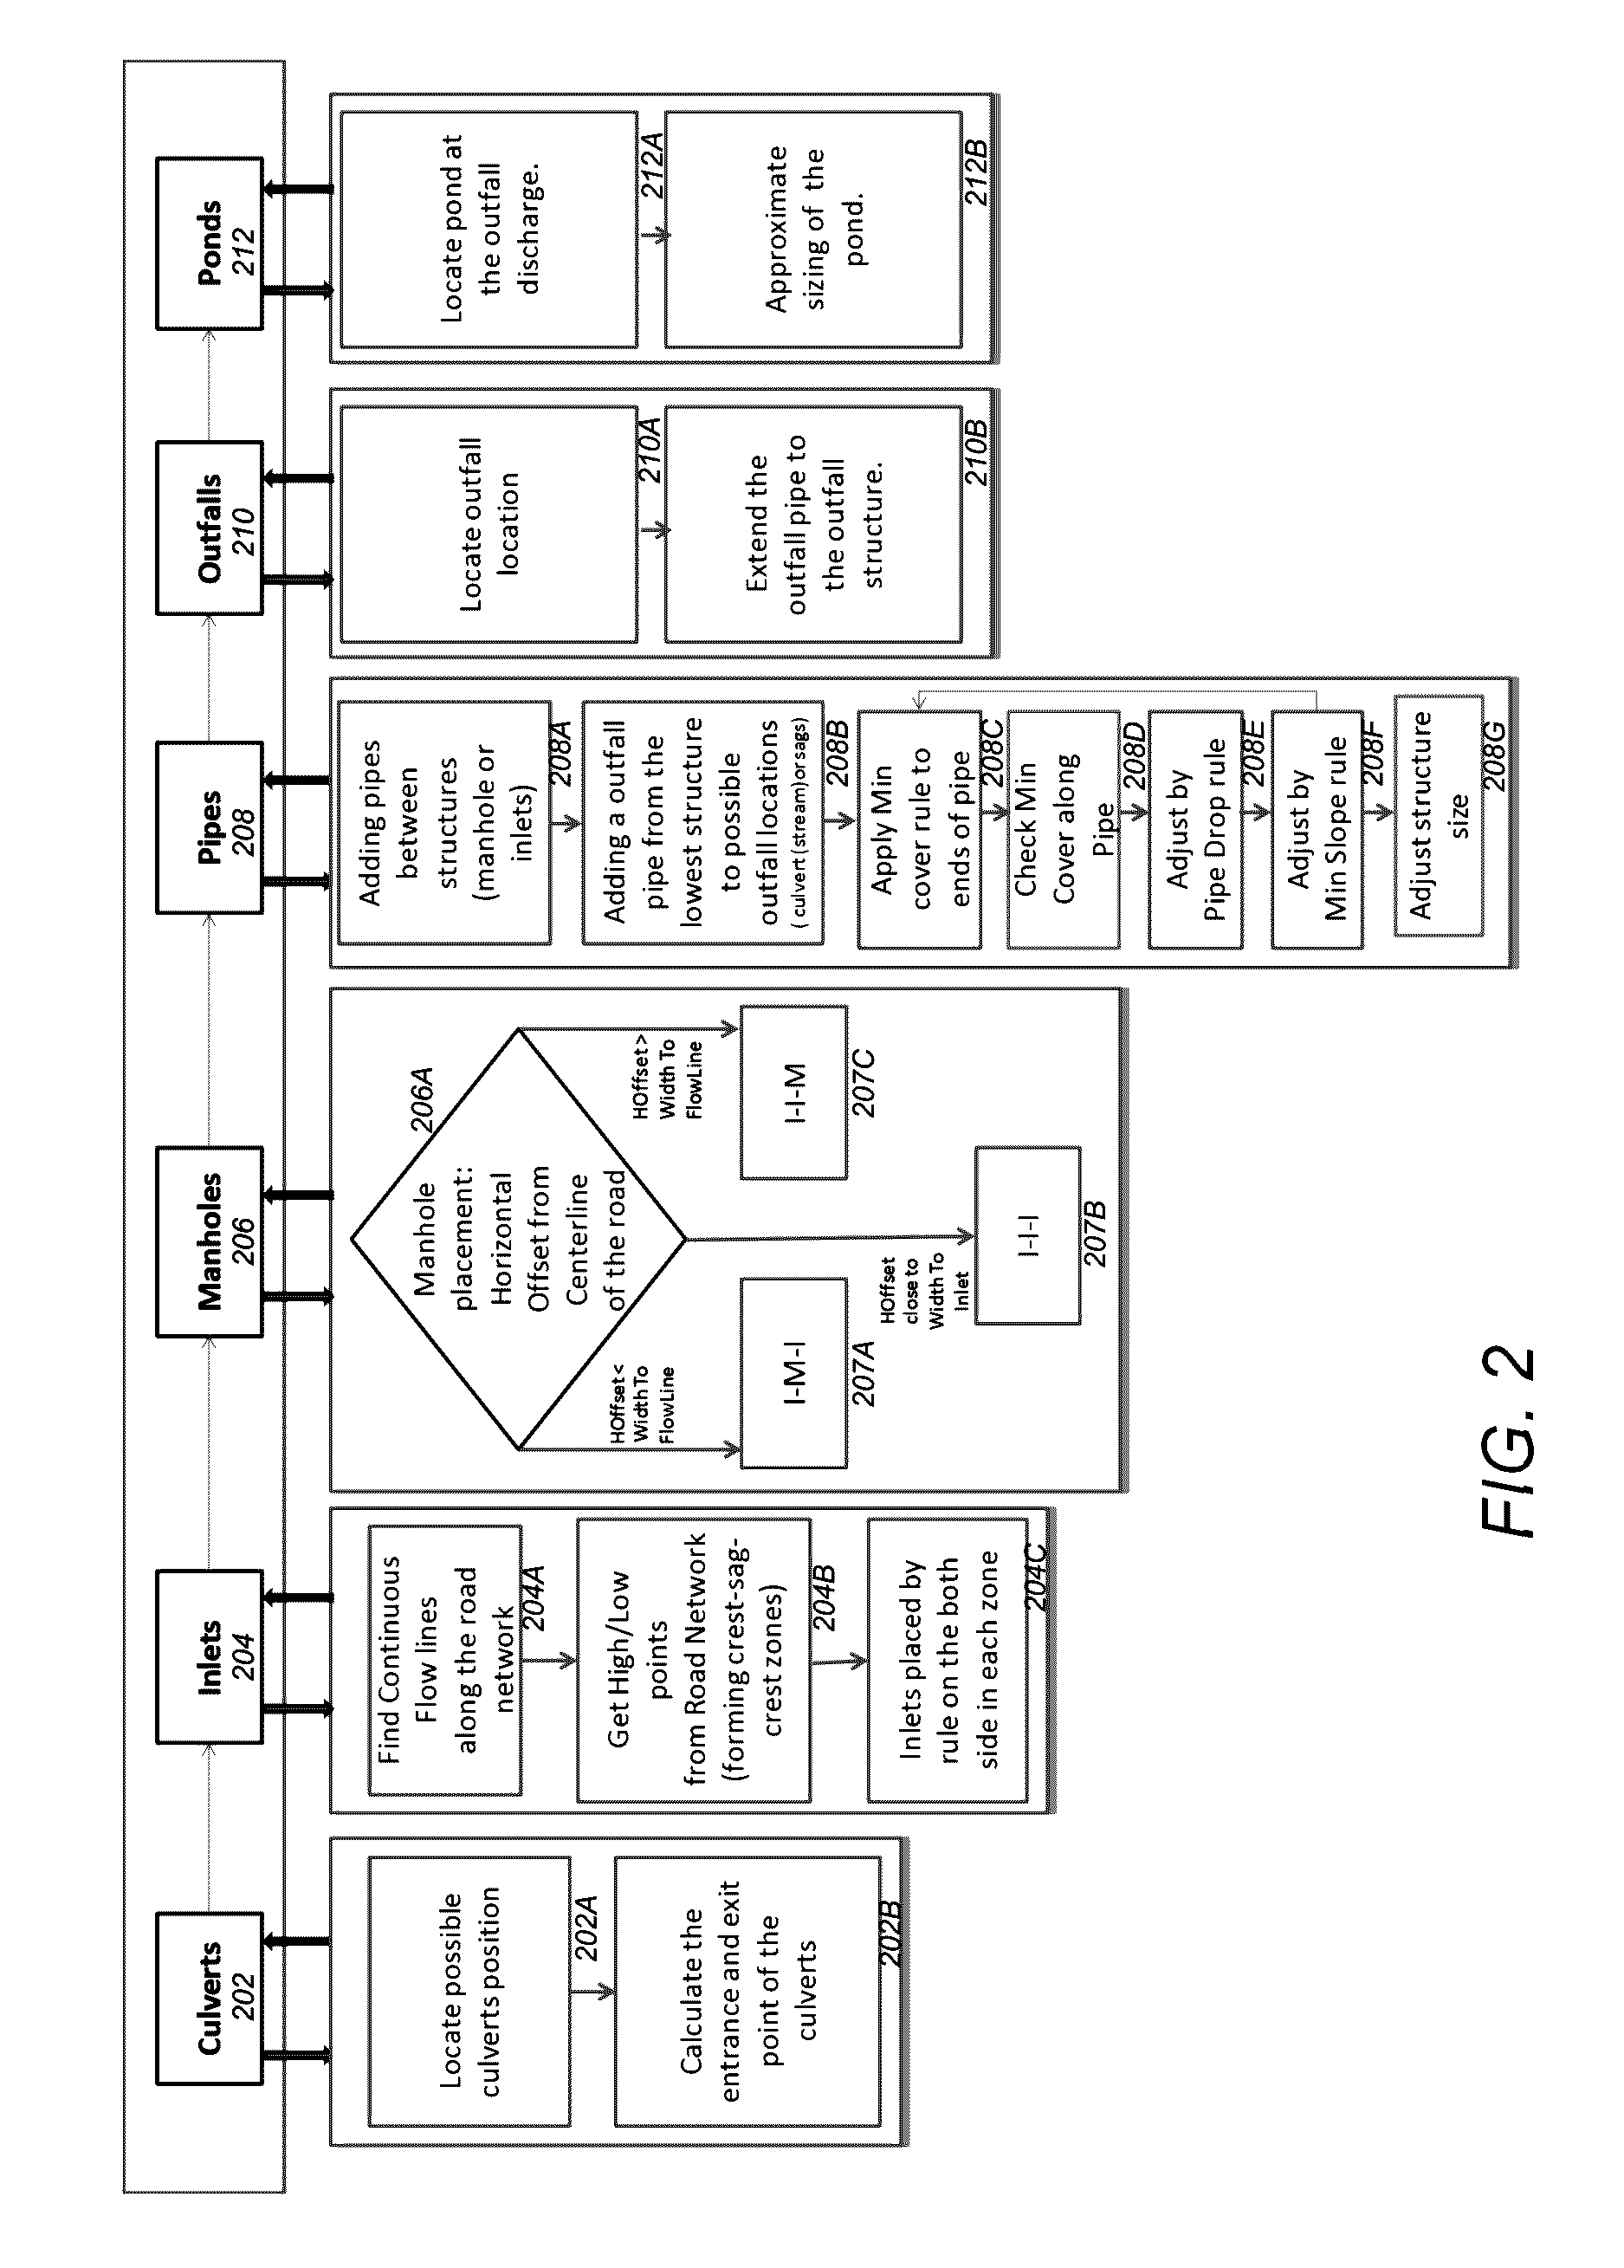 Method and apparatus for automatically creating a drainage system along a road network in a building information model (BIM) computer aided design (CAD) three-dimensional (3D) model